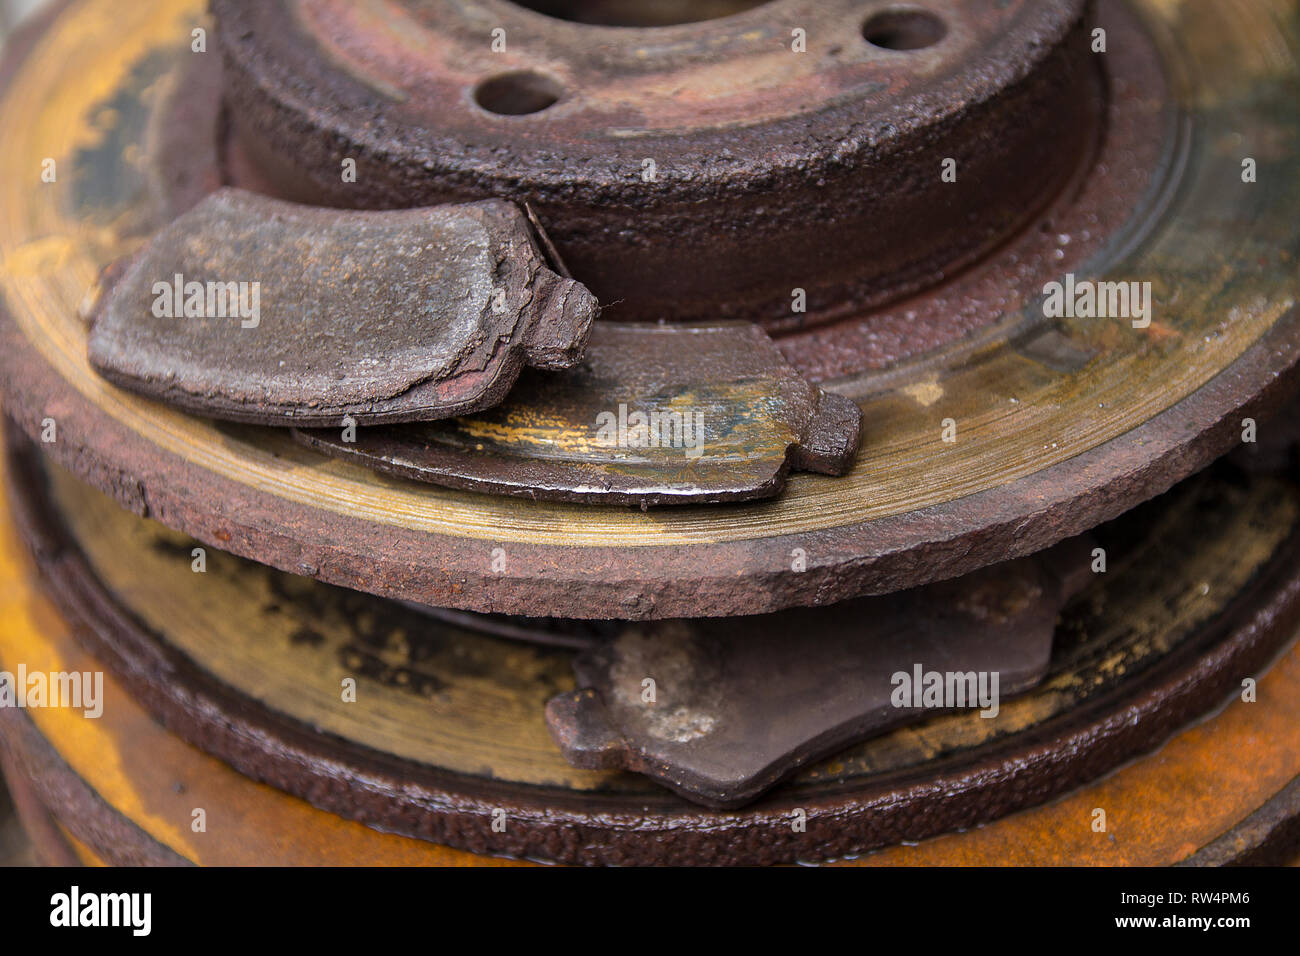 Car brake parts worn and rusty ready for recycling. The brake pads have little or no friction material left causing extra wear on the brake discs. Stock Photo